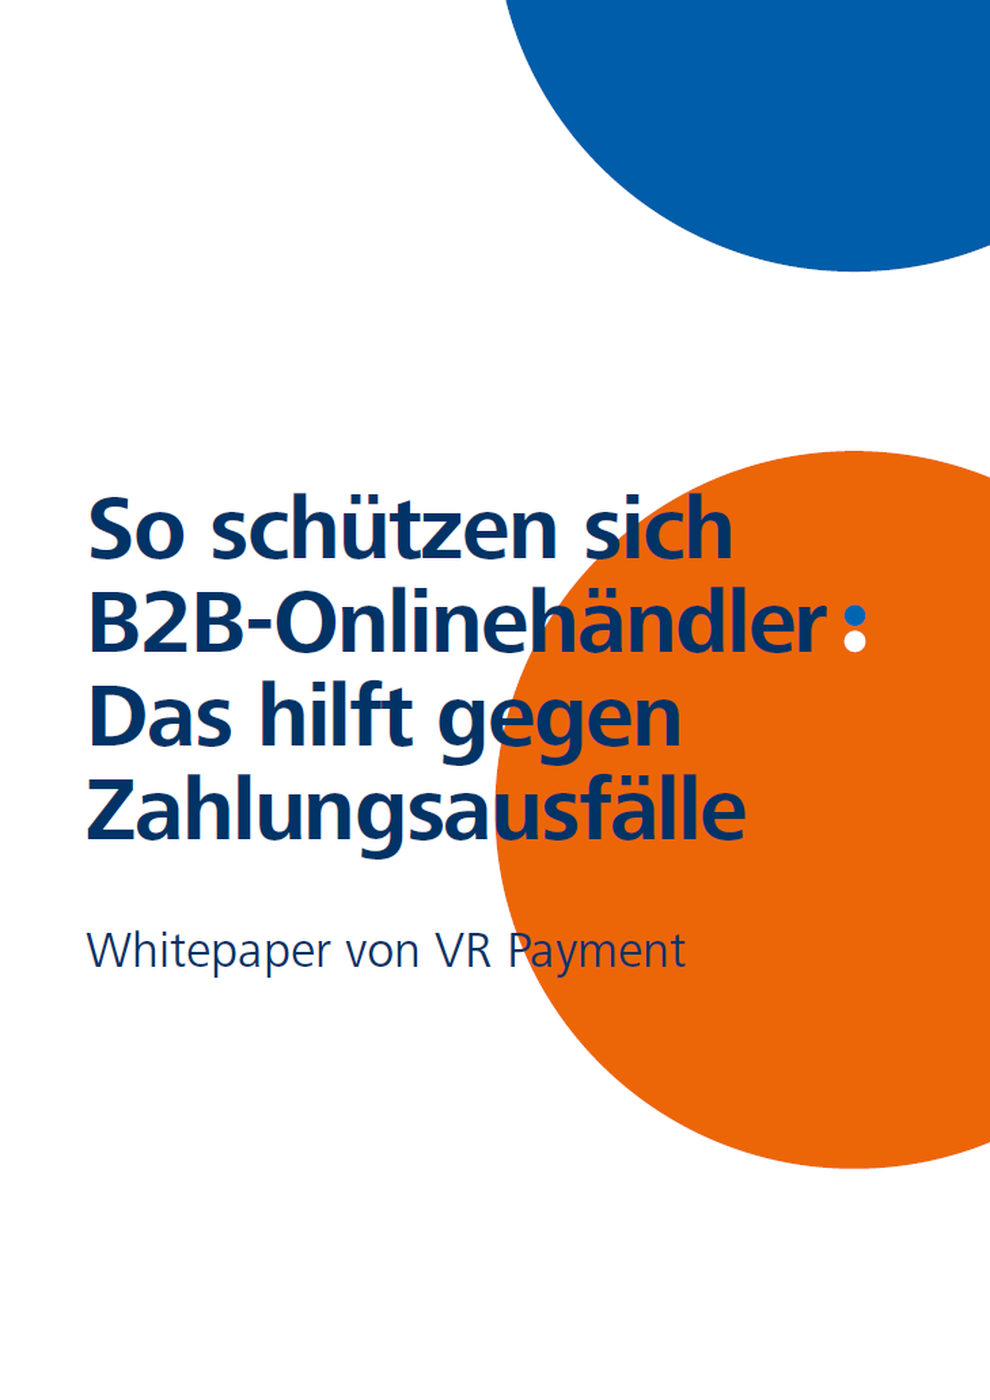  (VR Payment)